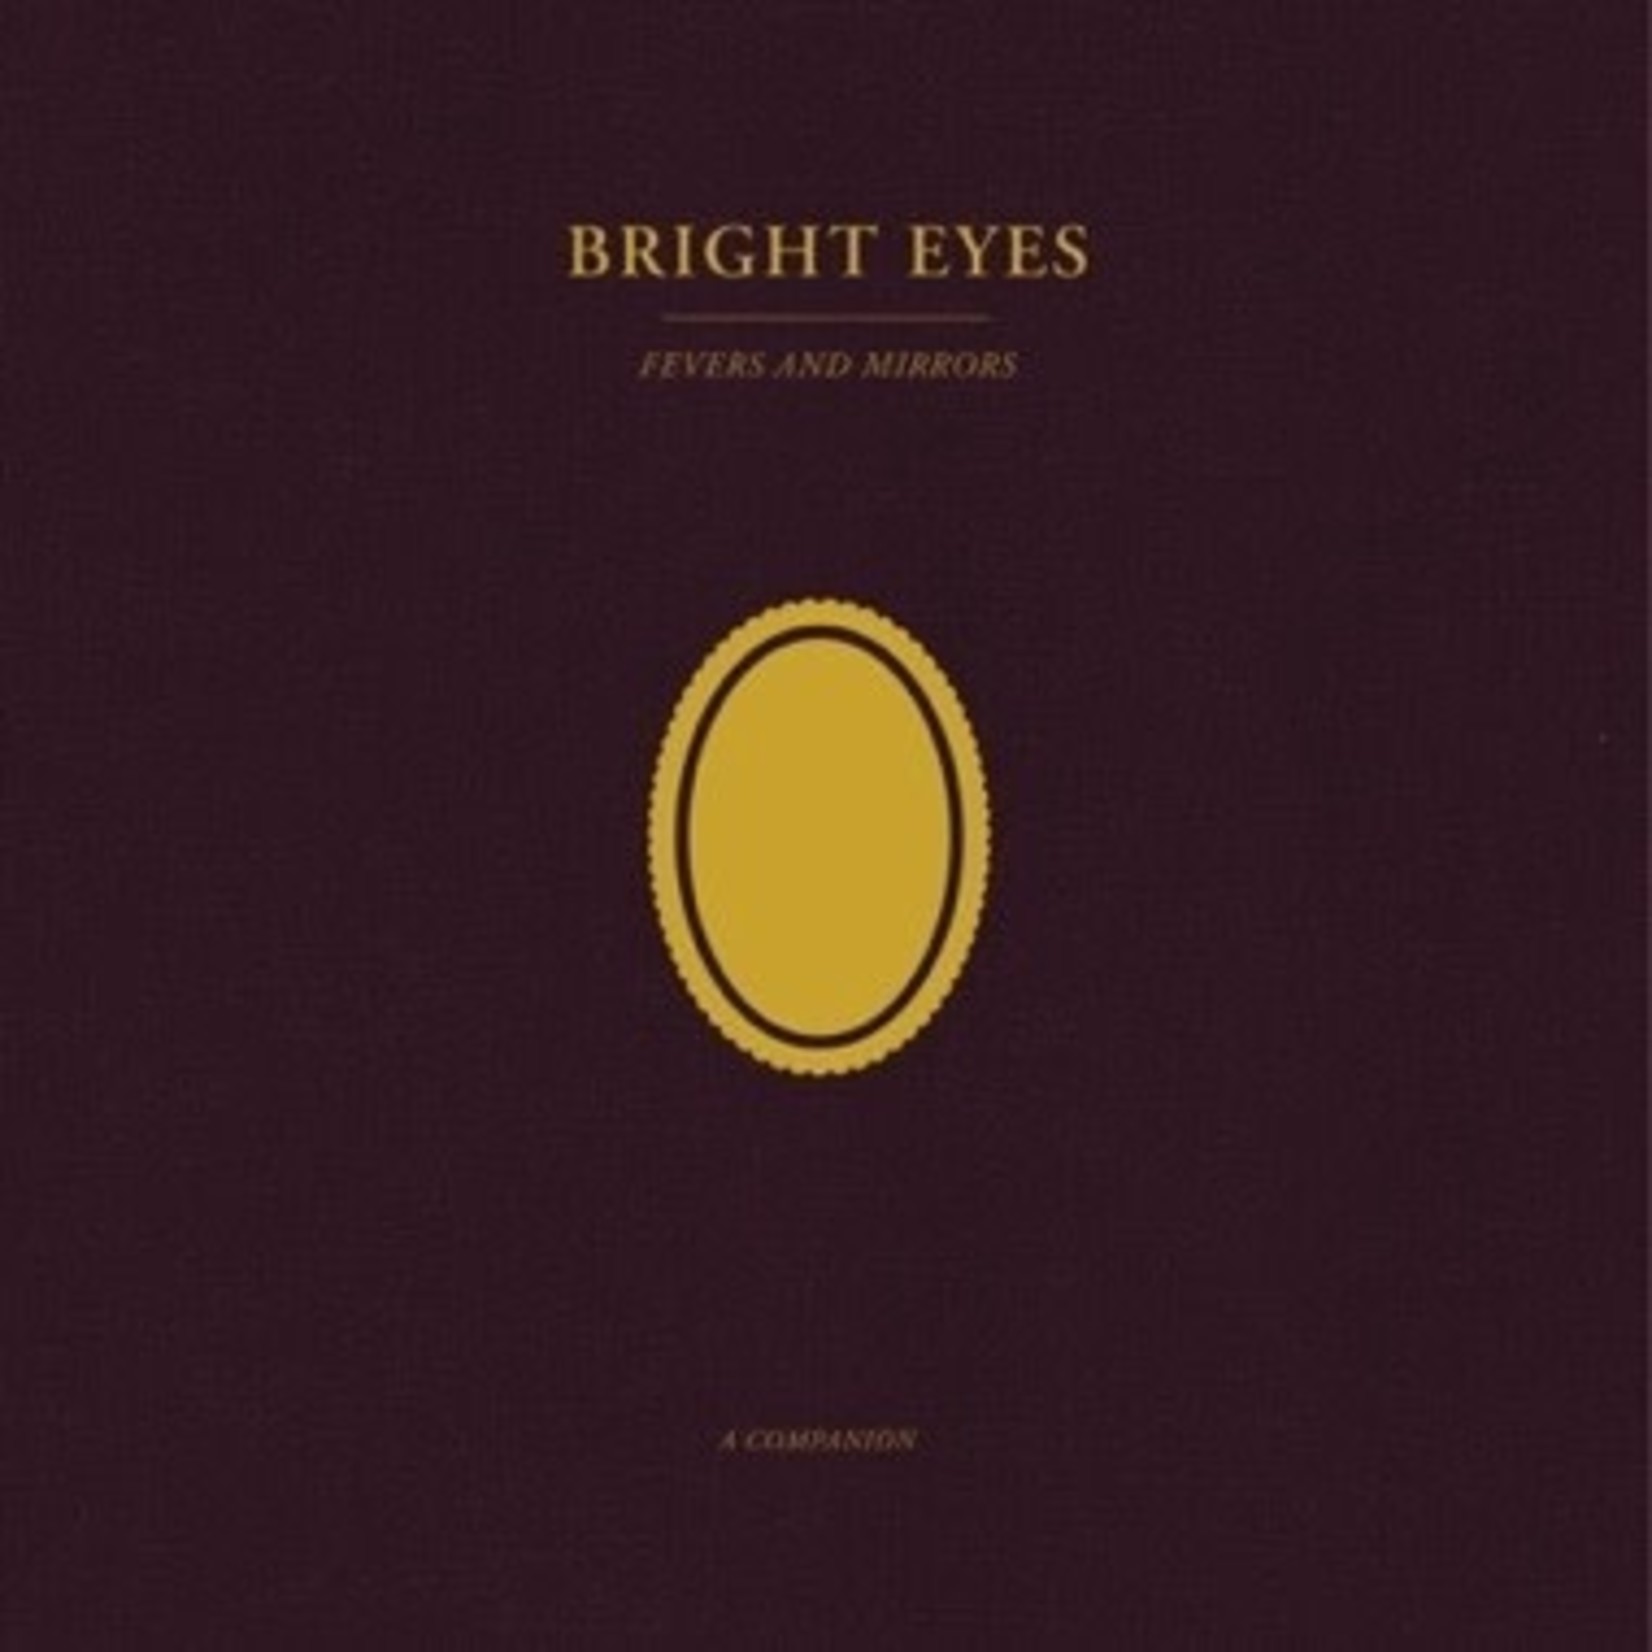 Dead Oceans Bright Eyes - Fevers And Mirrors: A Companion (12") [Gold]